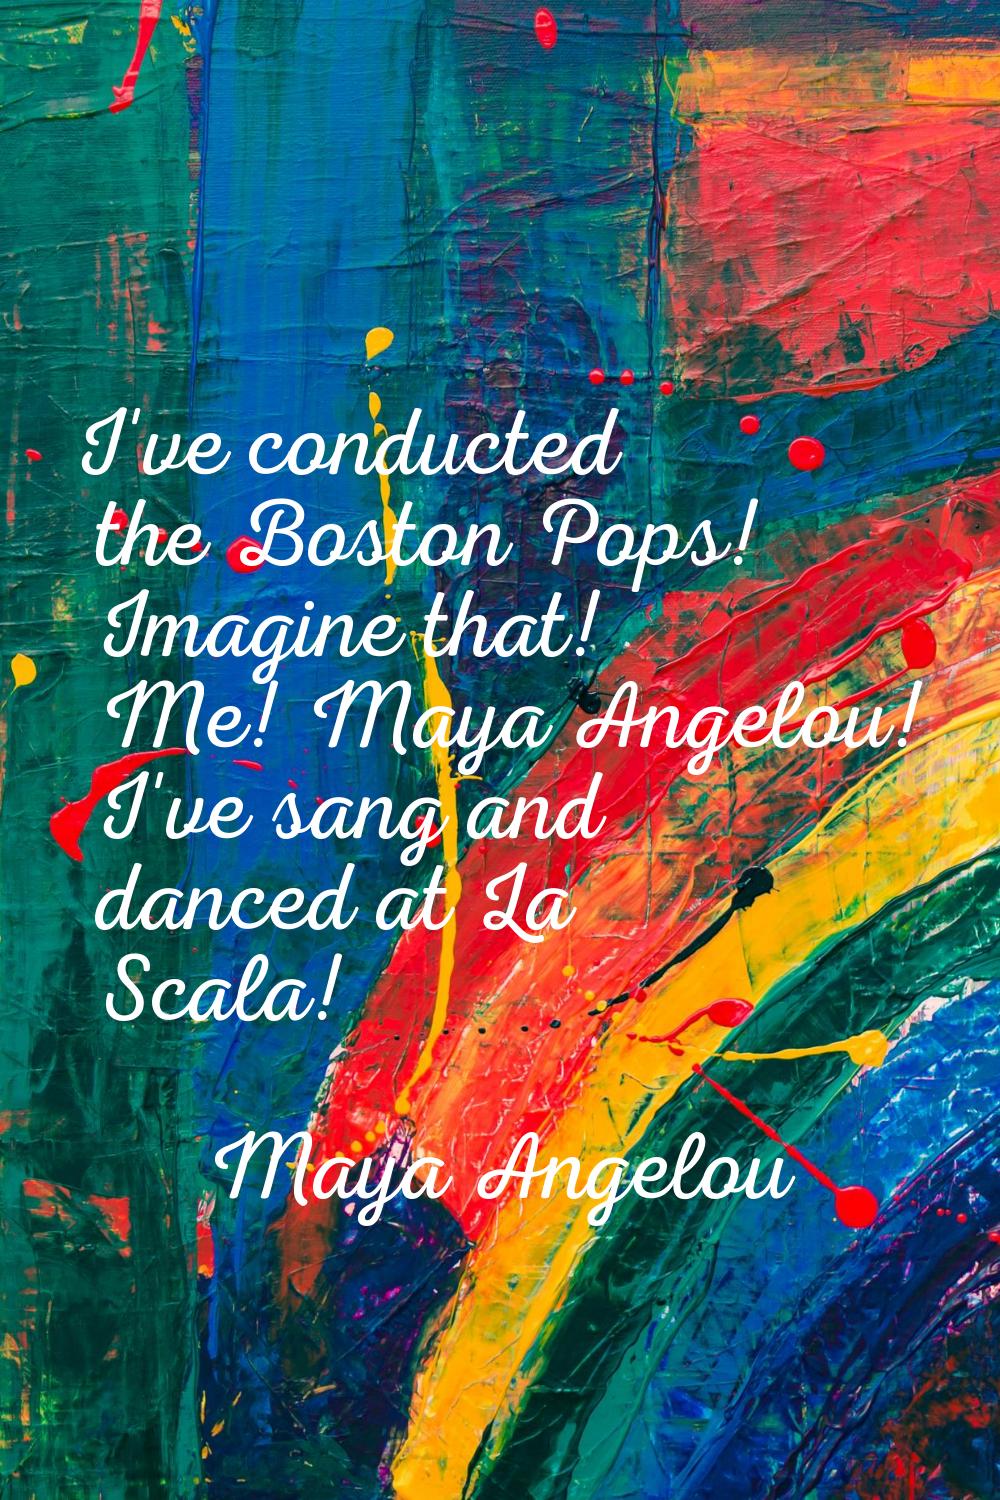 I've conducted the Boston Pops! Imagine that! Me! Maya Angelou! I've sang and danced at La Scala!